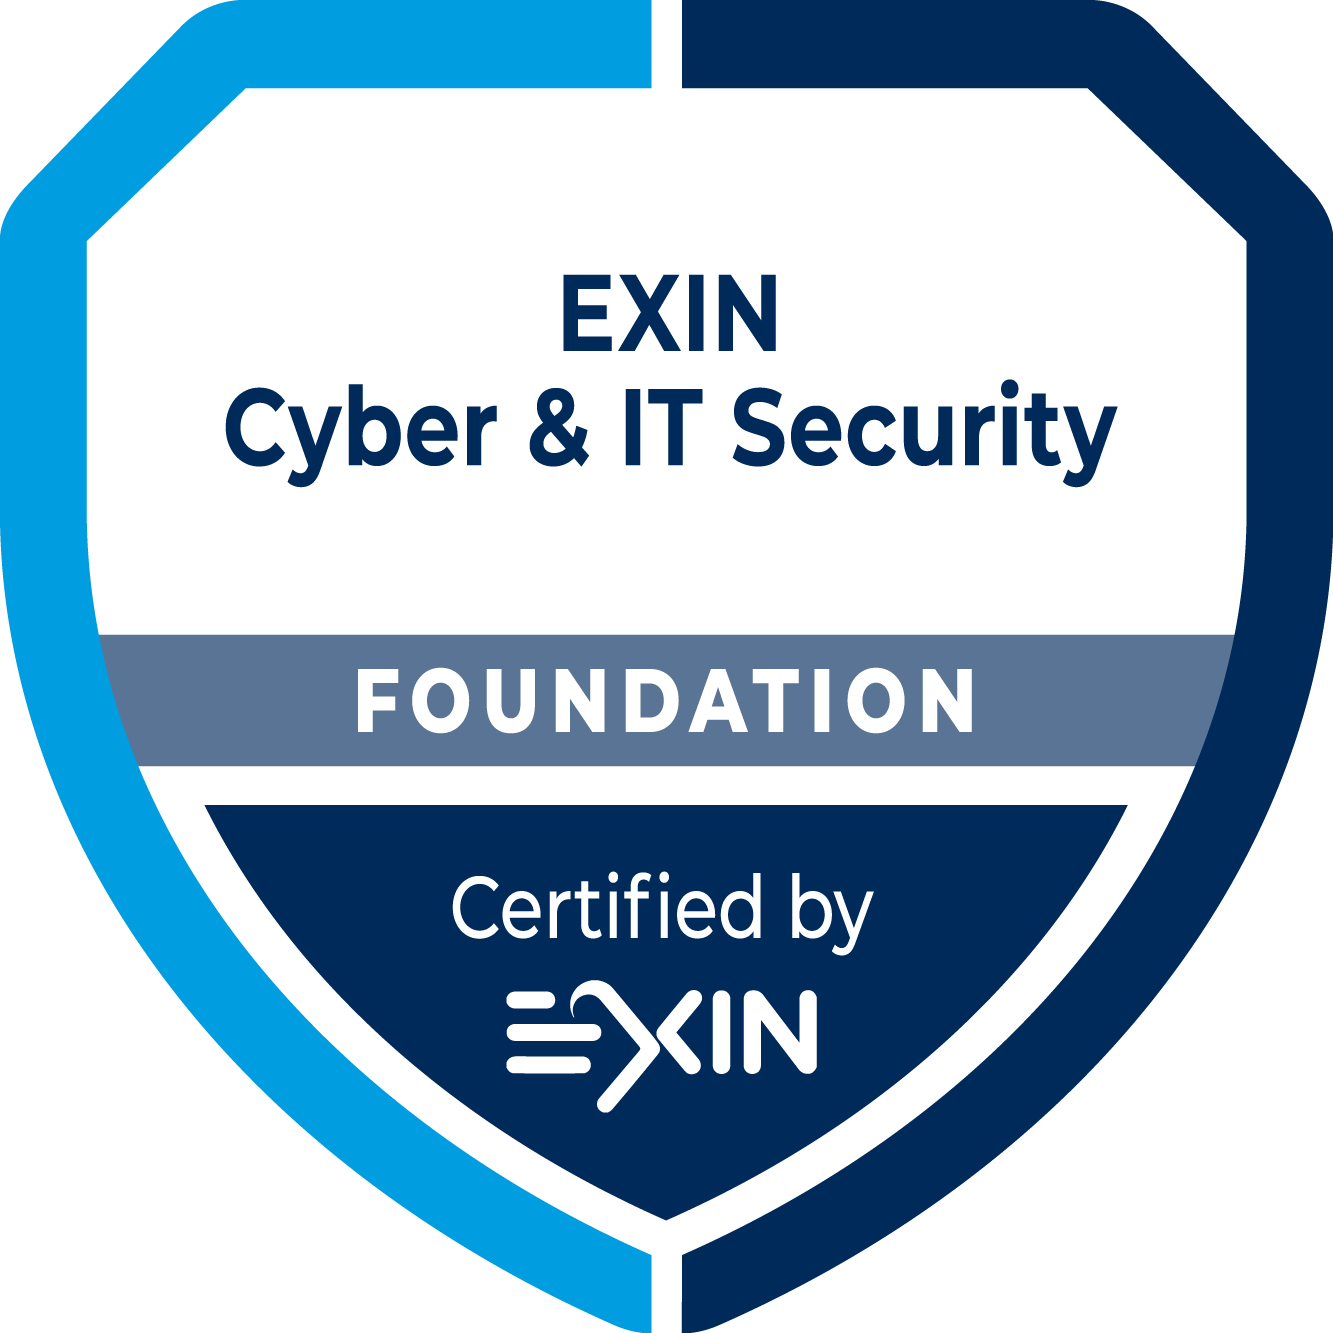 EXIN Cyber and IT Security Foundation